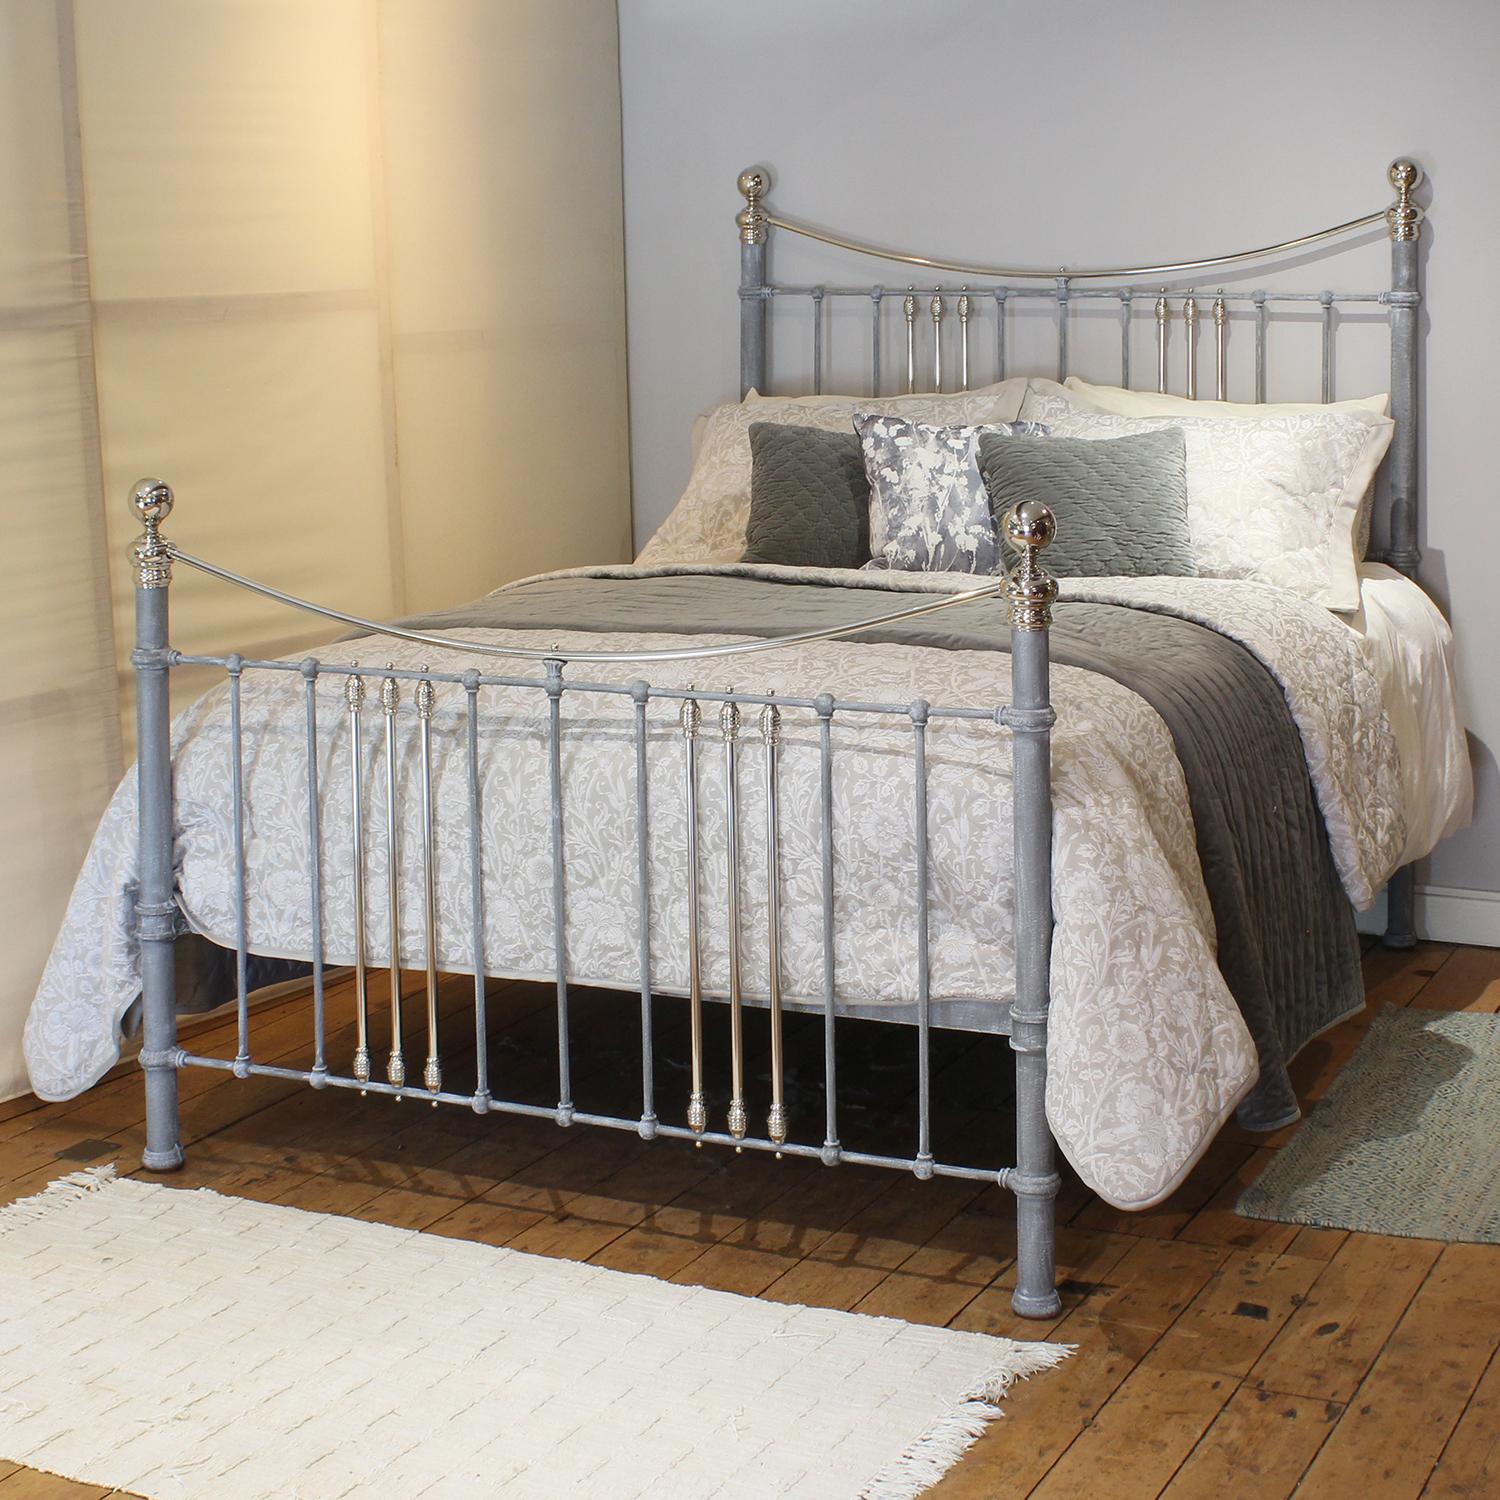 A Victorian bedstead finished in silver with nickel plated rails, knobs and collars, and simple round mouldings in a classic style. 

This bed accepts a UK king size or US queen size (5ft, 60in or 150cm wide) base and mattress set.

The price